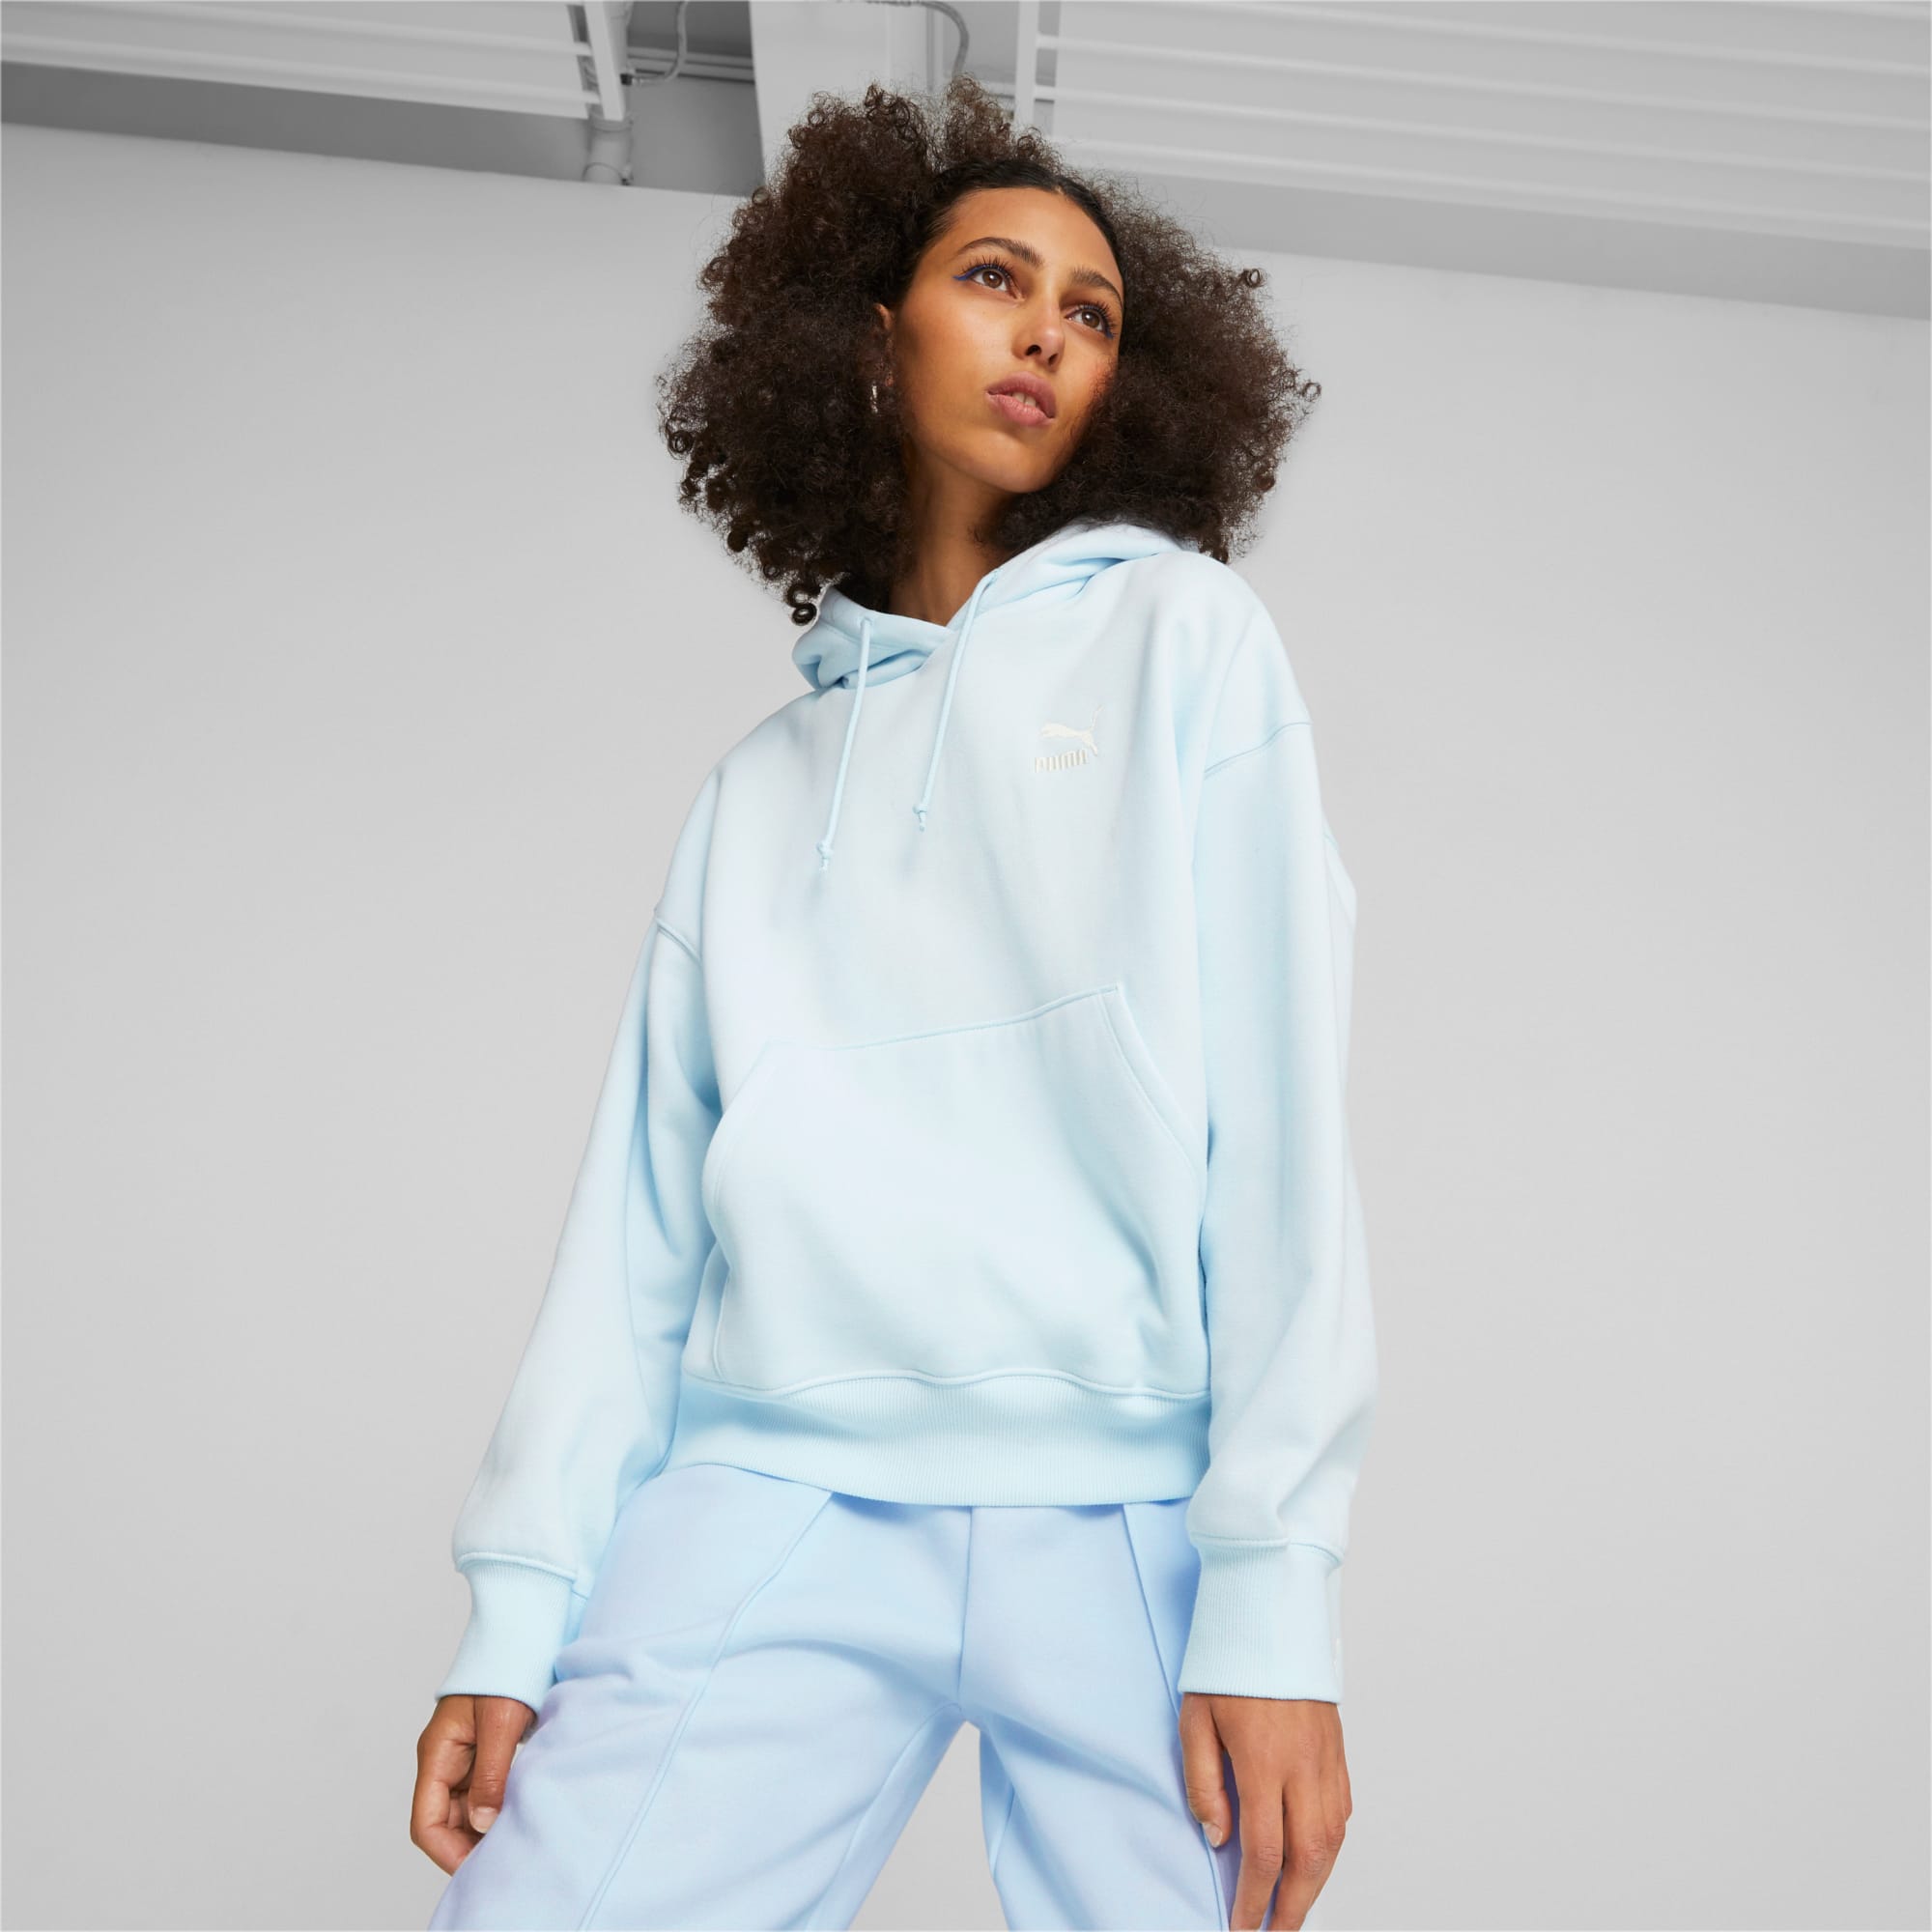 PUMA Classics Women's Oversized Hoodie, Icy Blue, Size L, Clothing